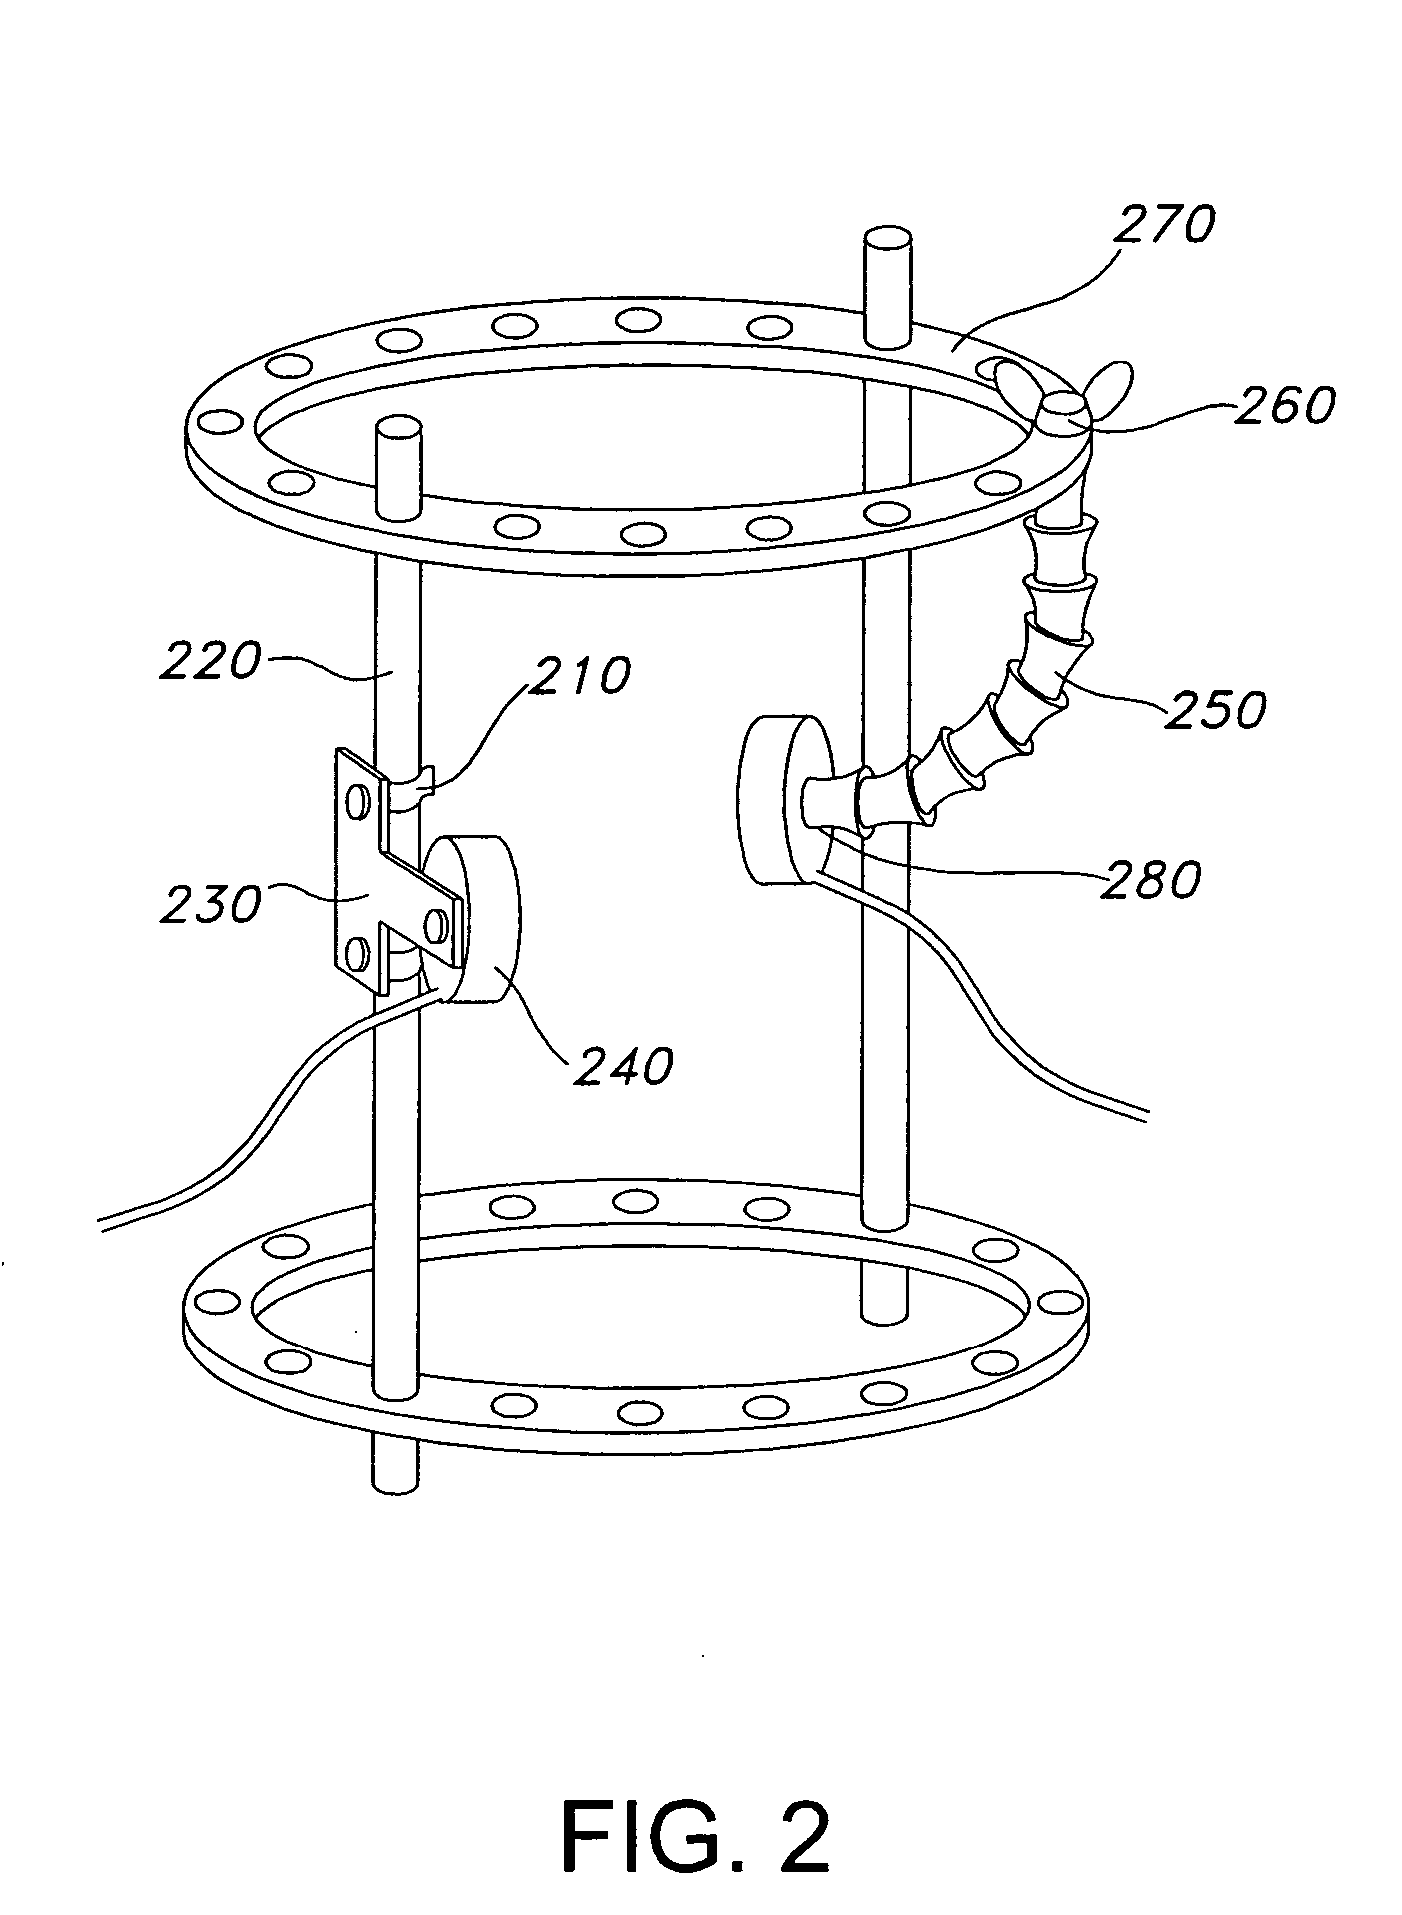 Transducer mounting assembly